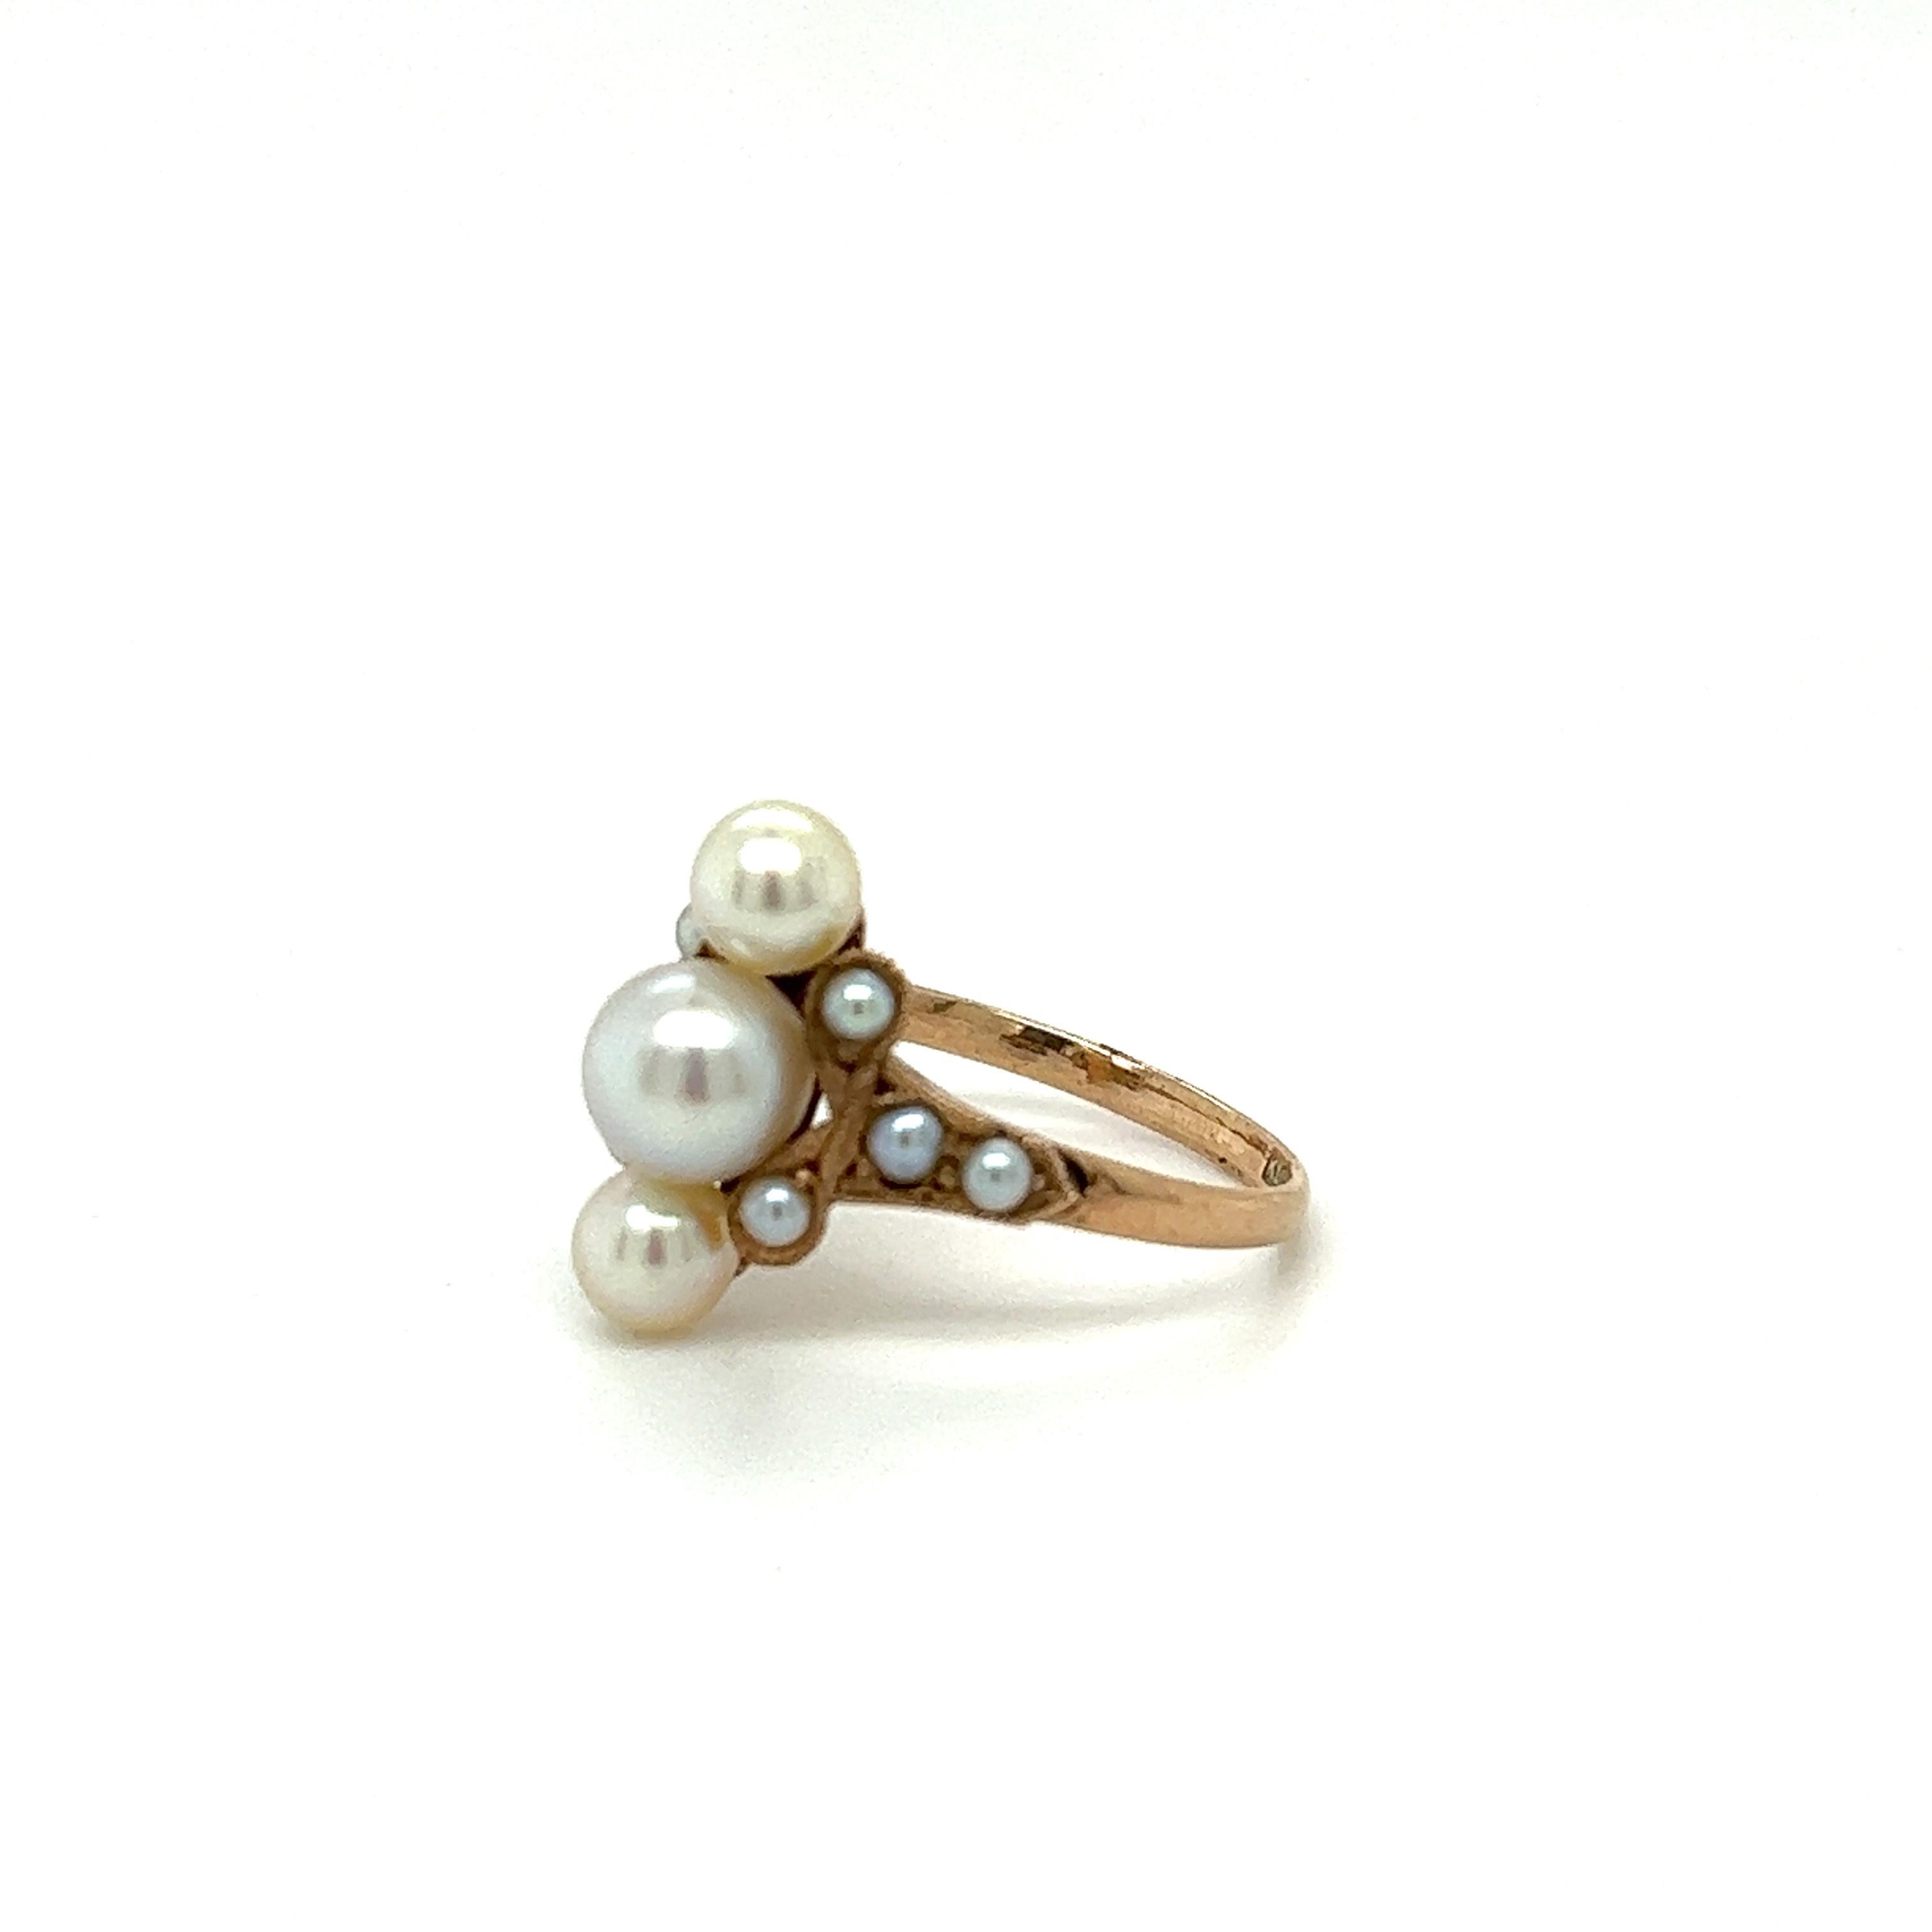 Ring Size: 6.5
Metal Type: 10k Rose Gold [Hallmarked, and Tested]
Weight: 2.7 grams
Center Pearl Diameter: 6.2mm
Finger to Top of Stone Measurement: 7.3mm
Condition: Excellent